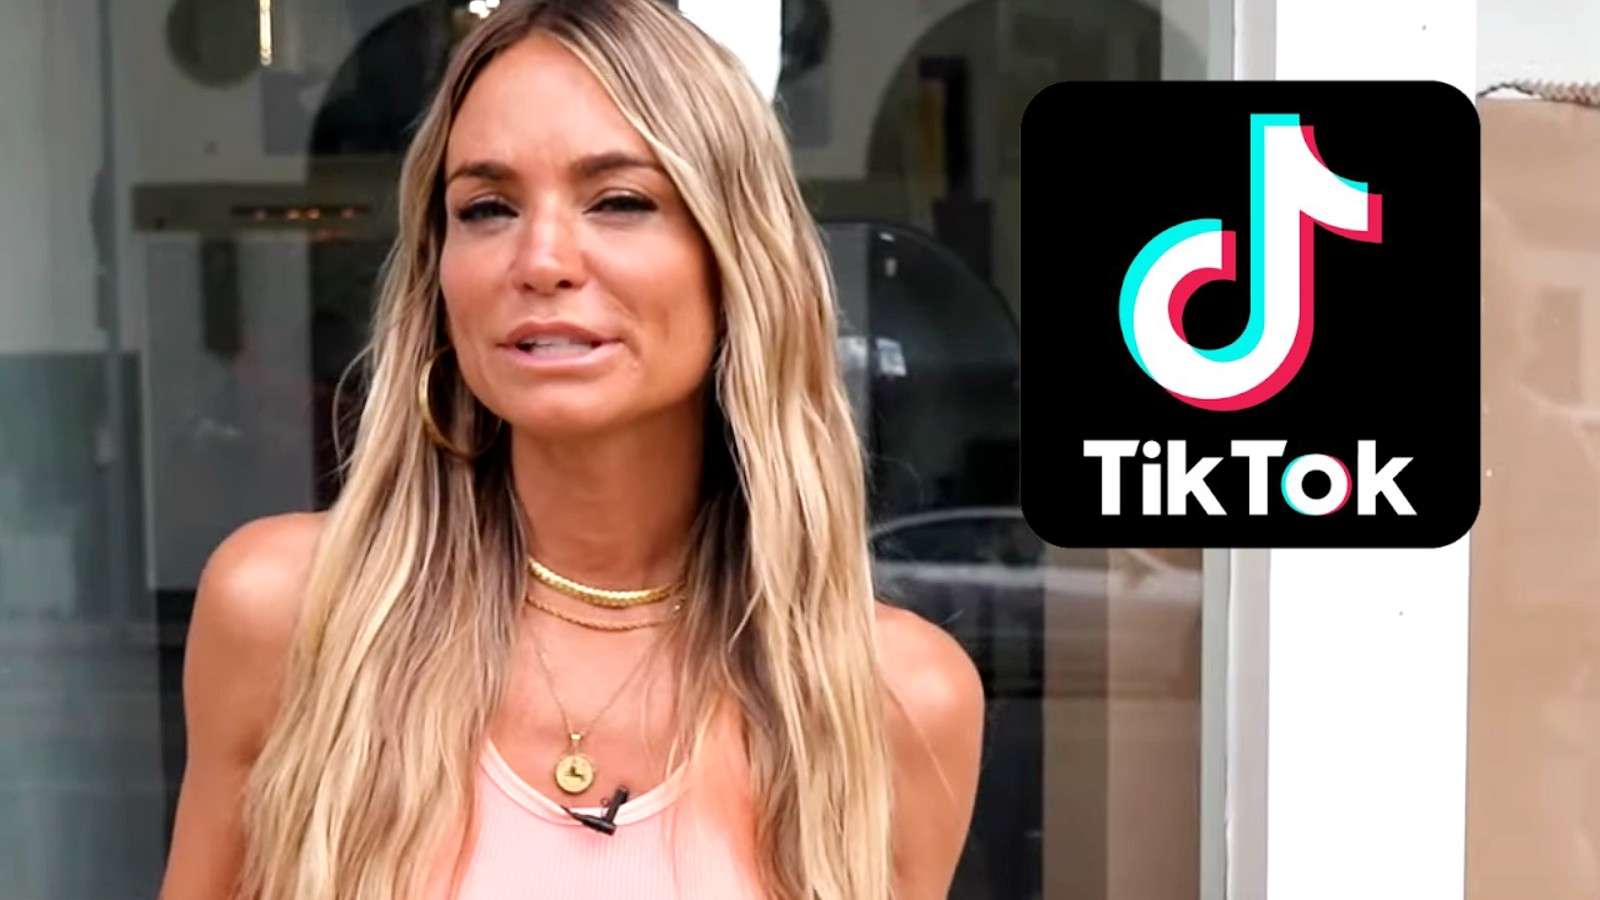 Image of Hair by Chrissy along with the TikTok logo